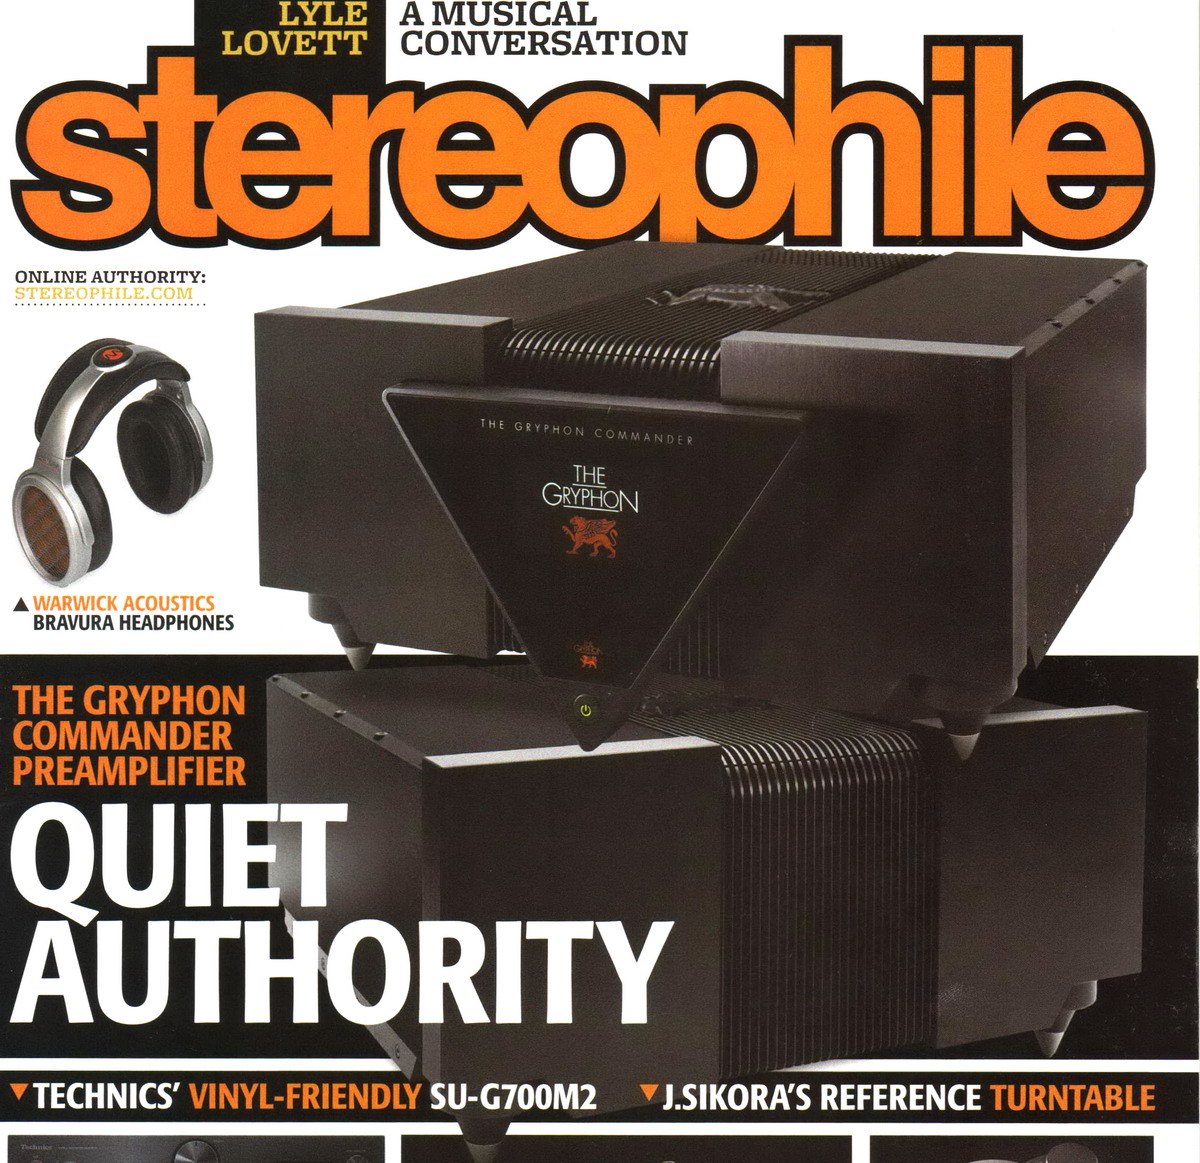 „Stereophile” Vol.45 No.7 ⸜ July 2022